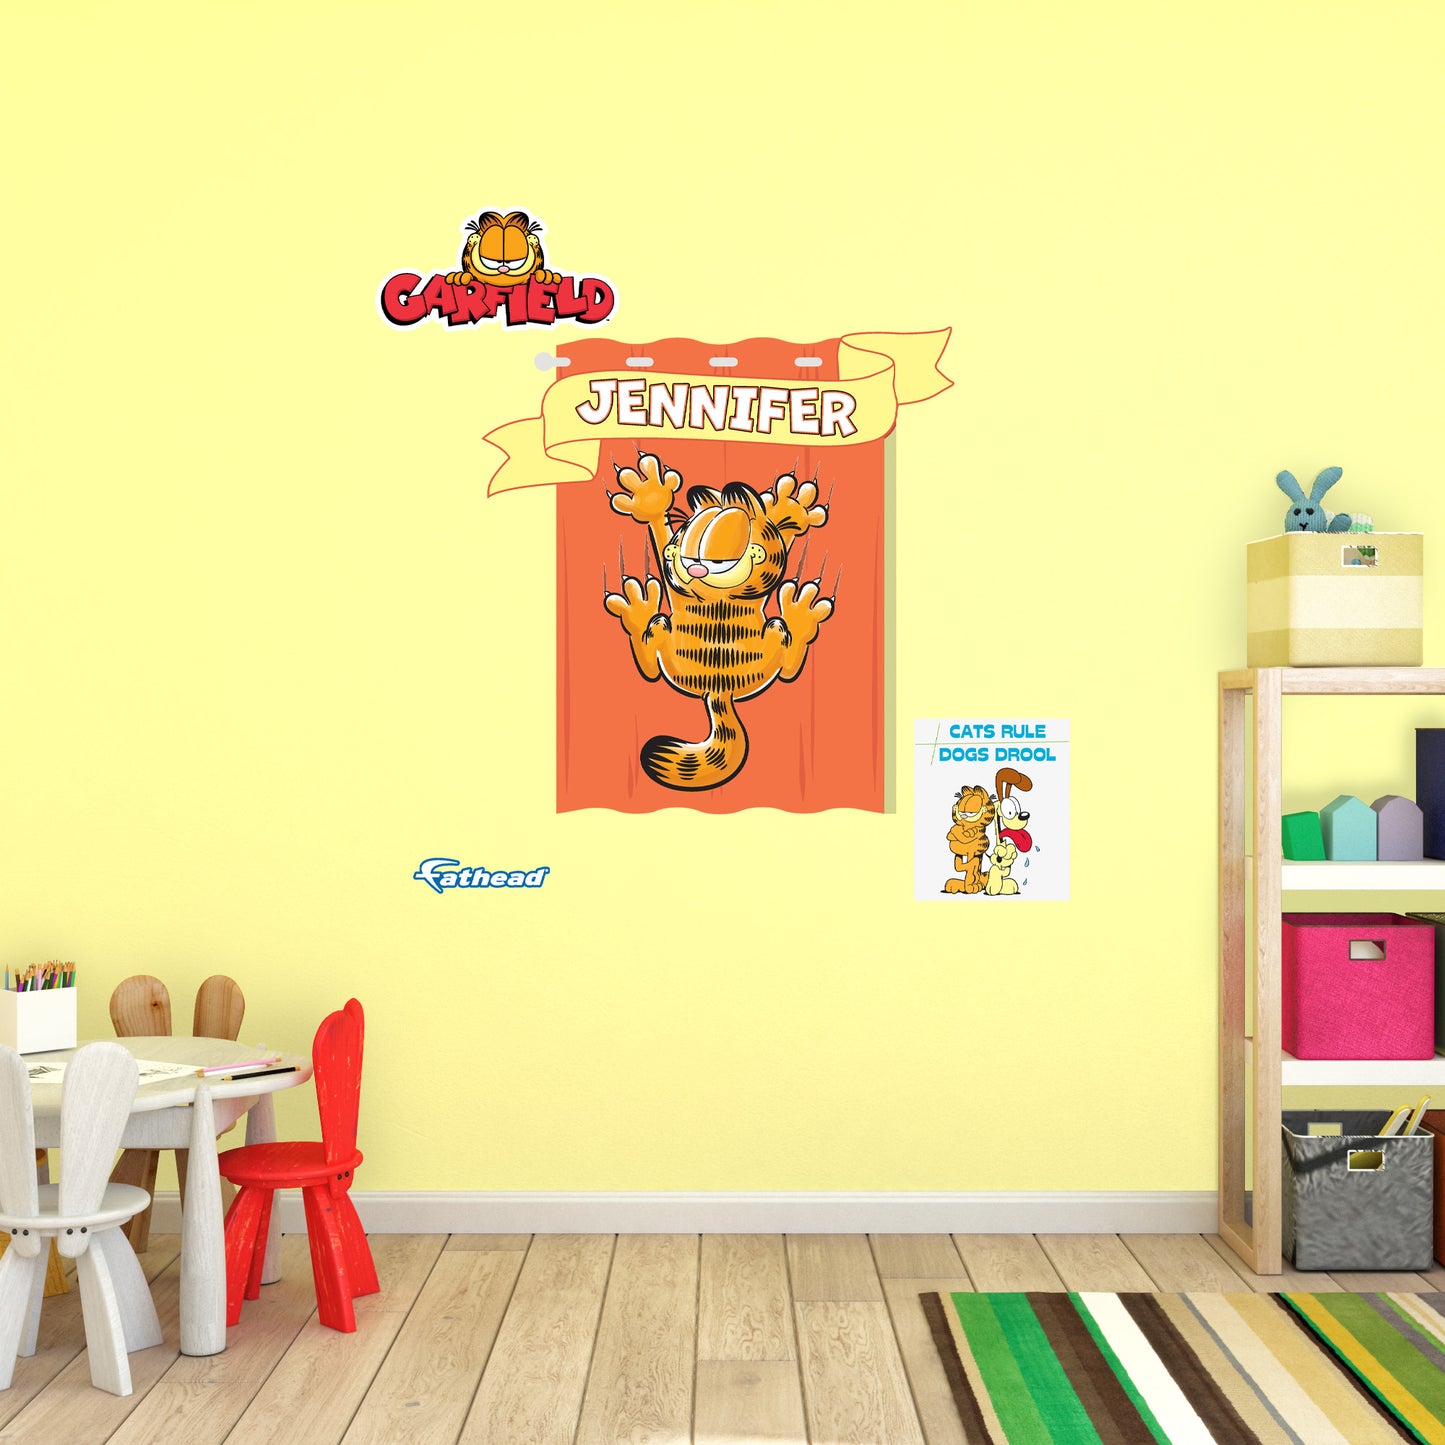 Garfield: Garfield Scratch Personalized Name Icon        - Officially Licensed Nickelodeon Removable     Adhesive Decal